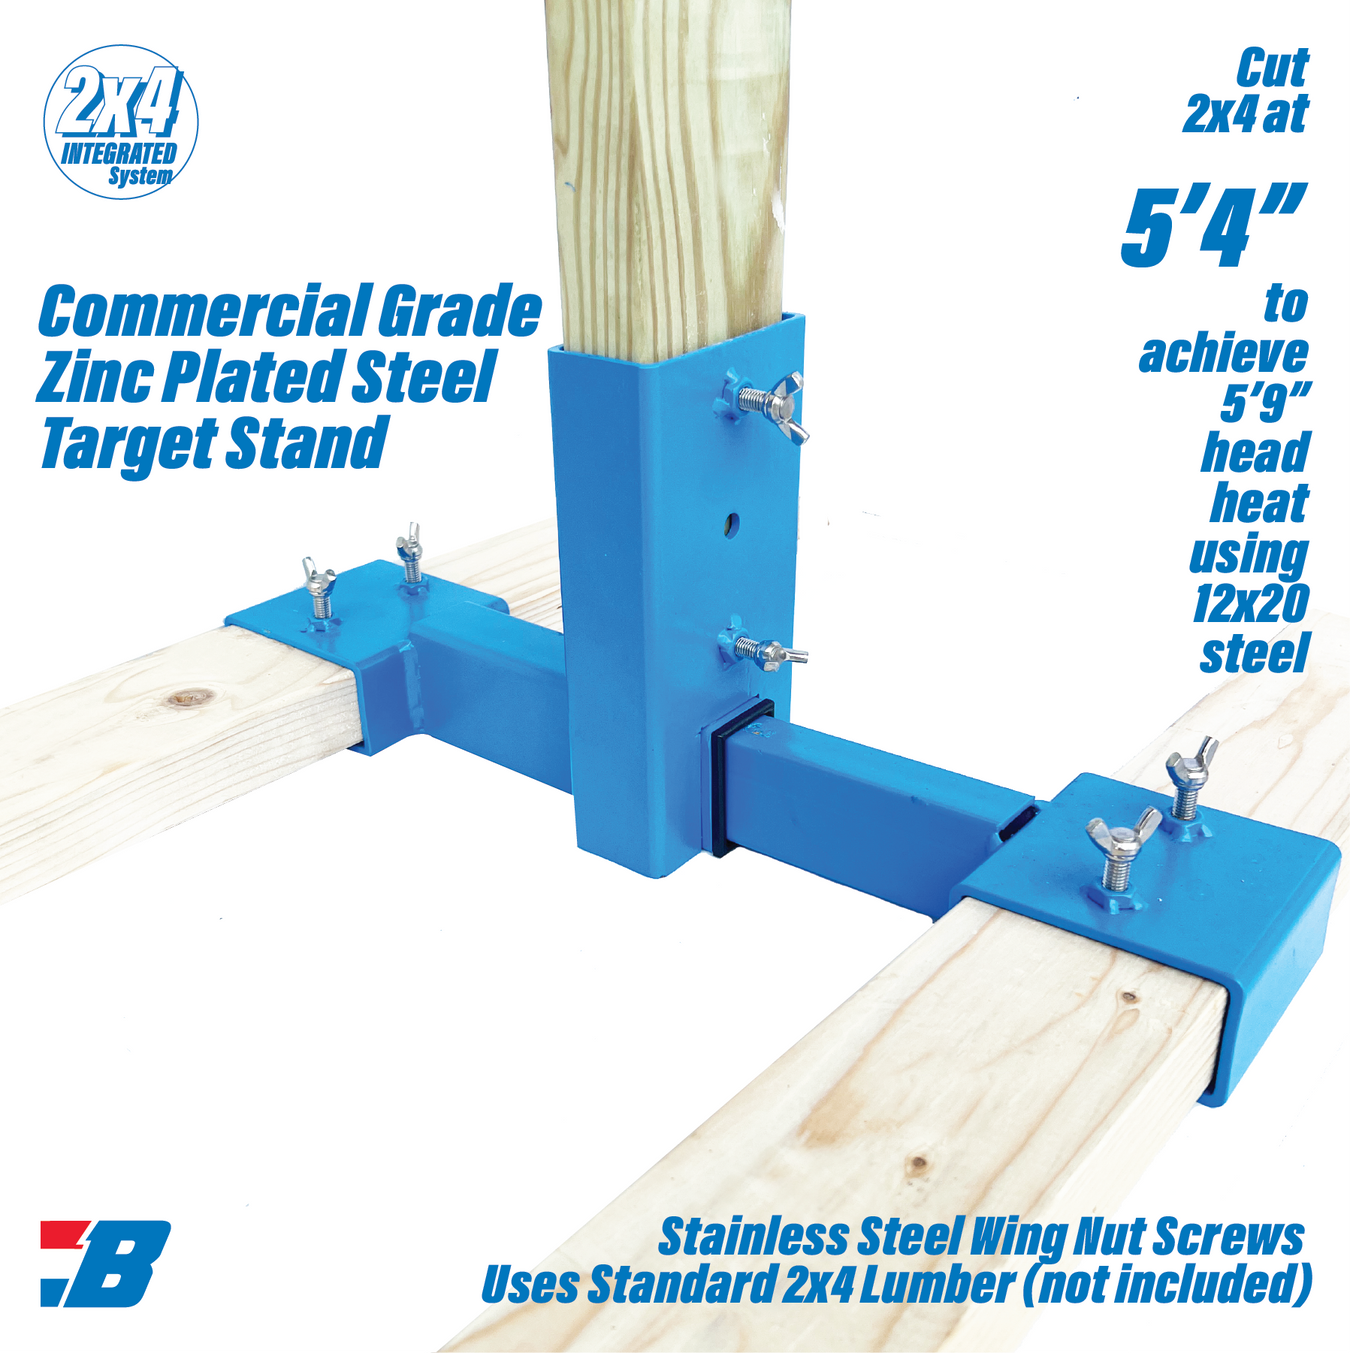 2x4 Vertical Stand